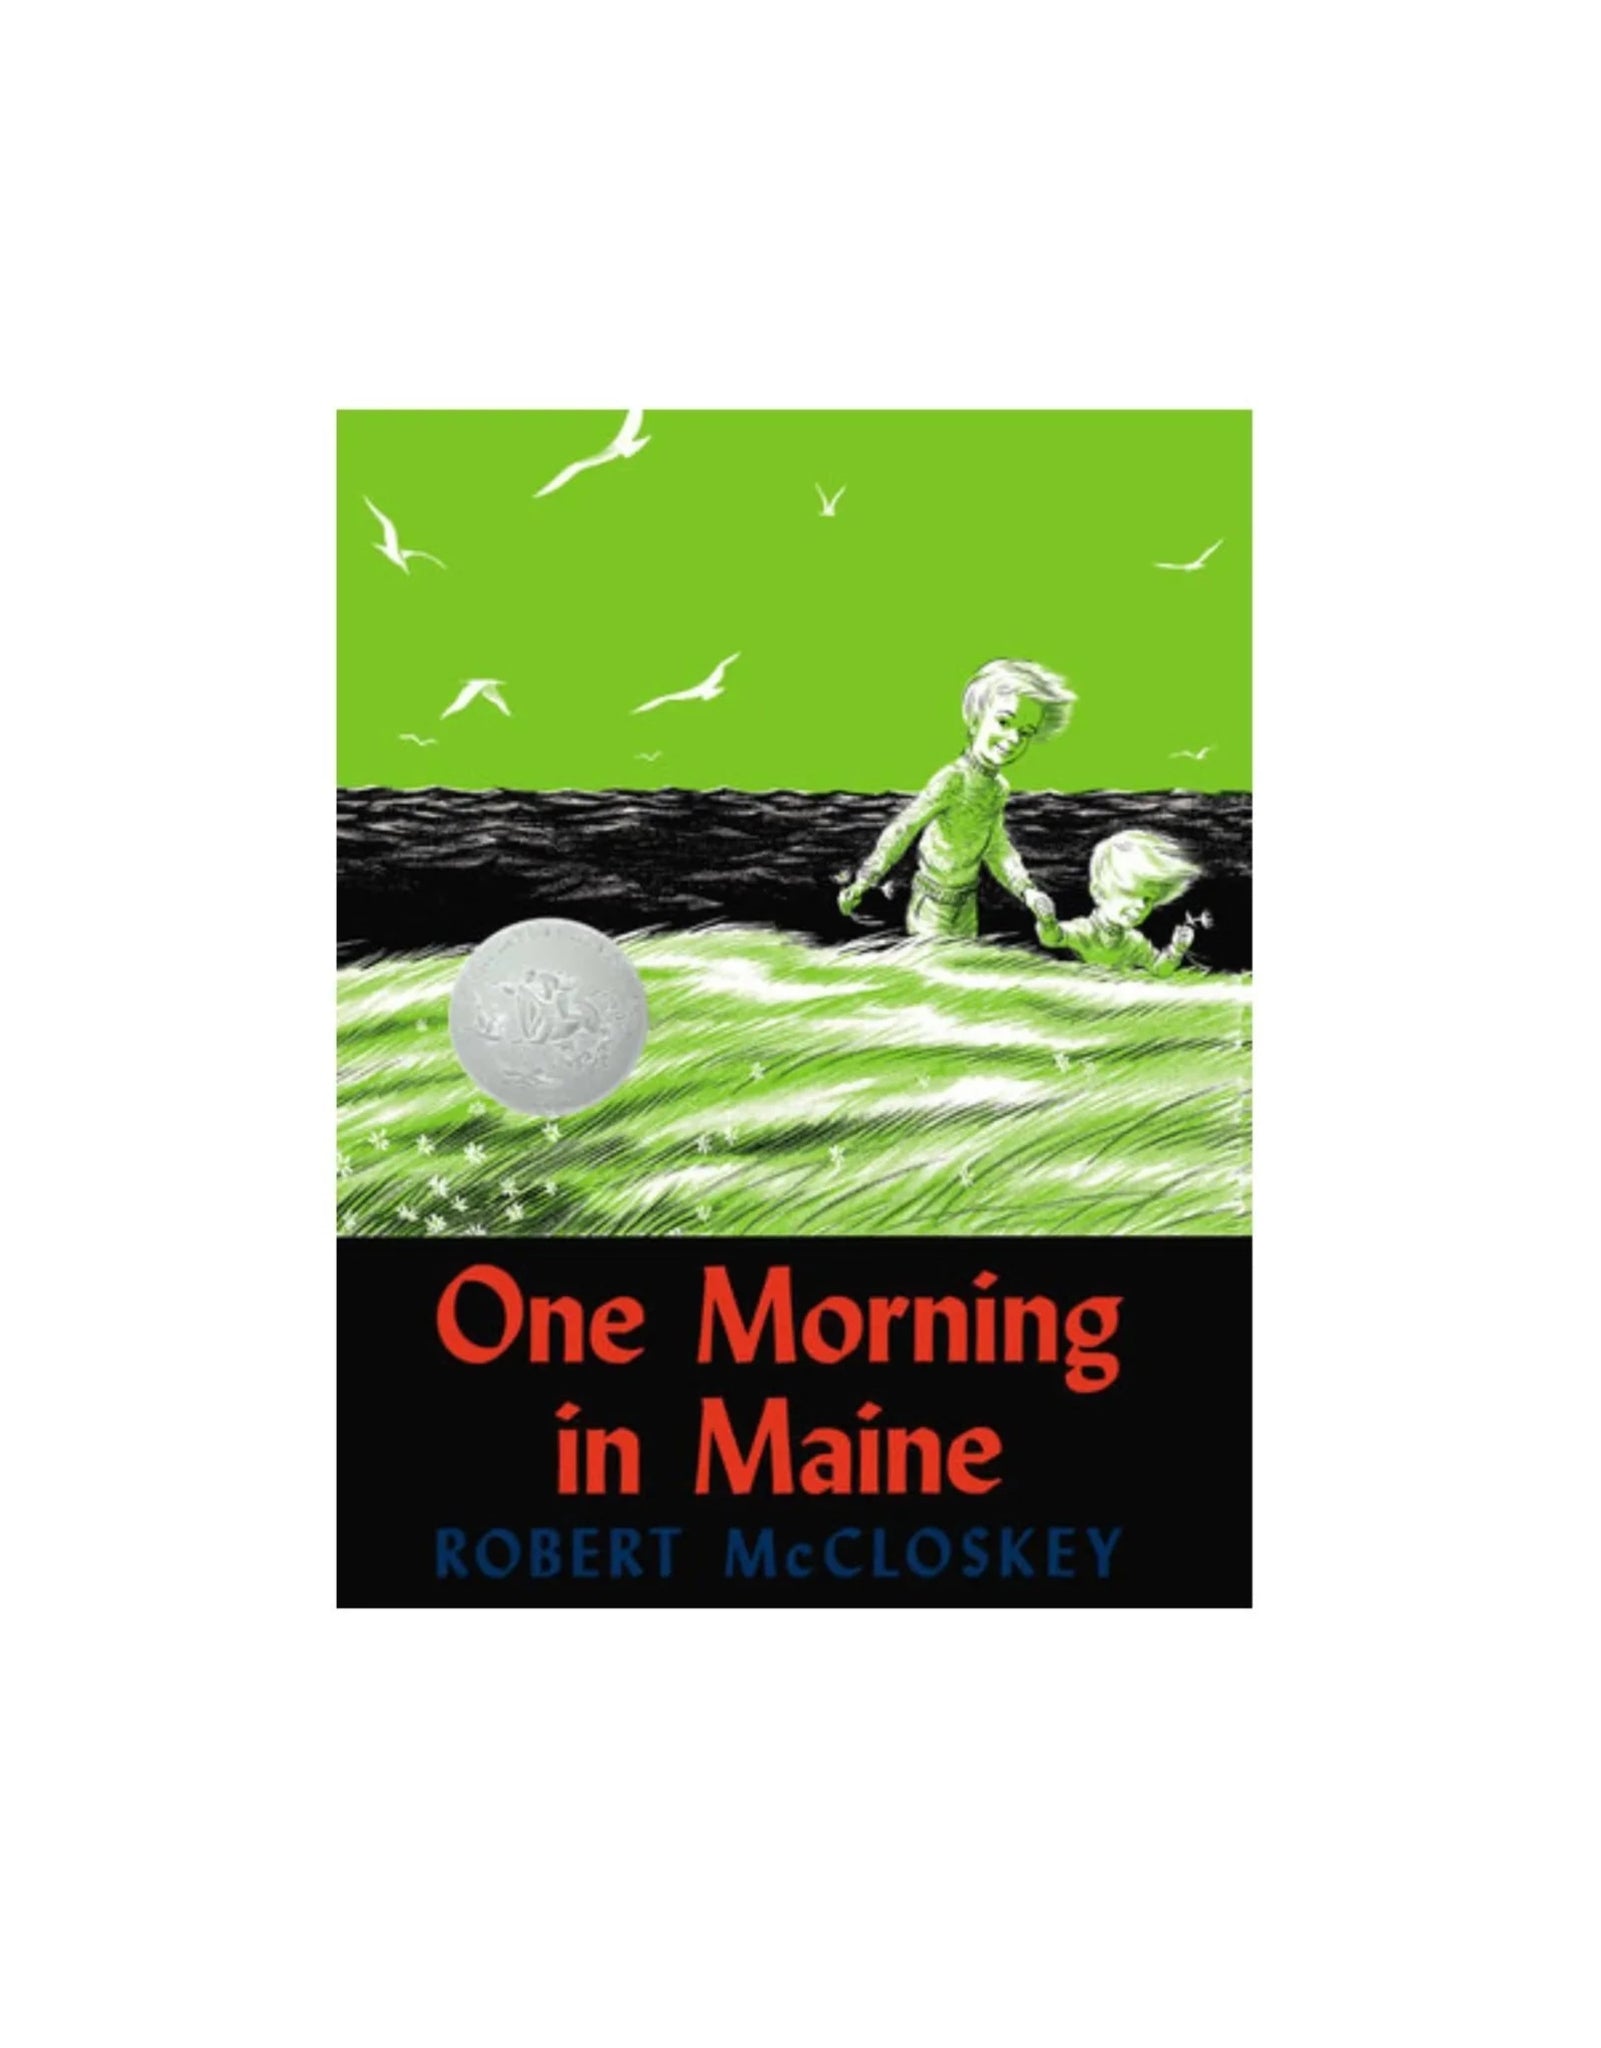 One morning in Maine book